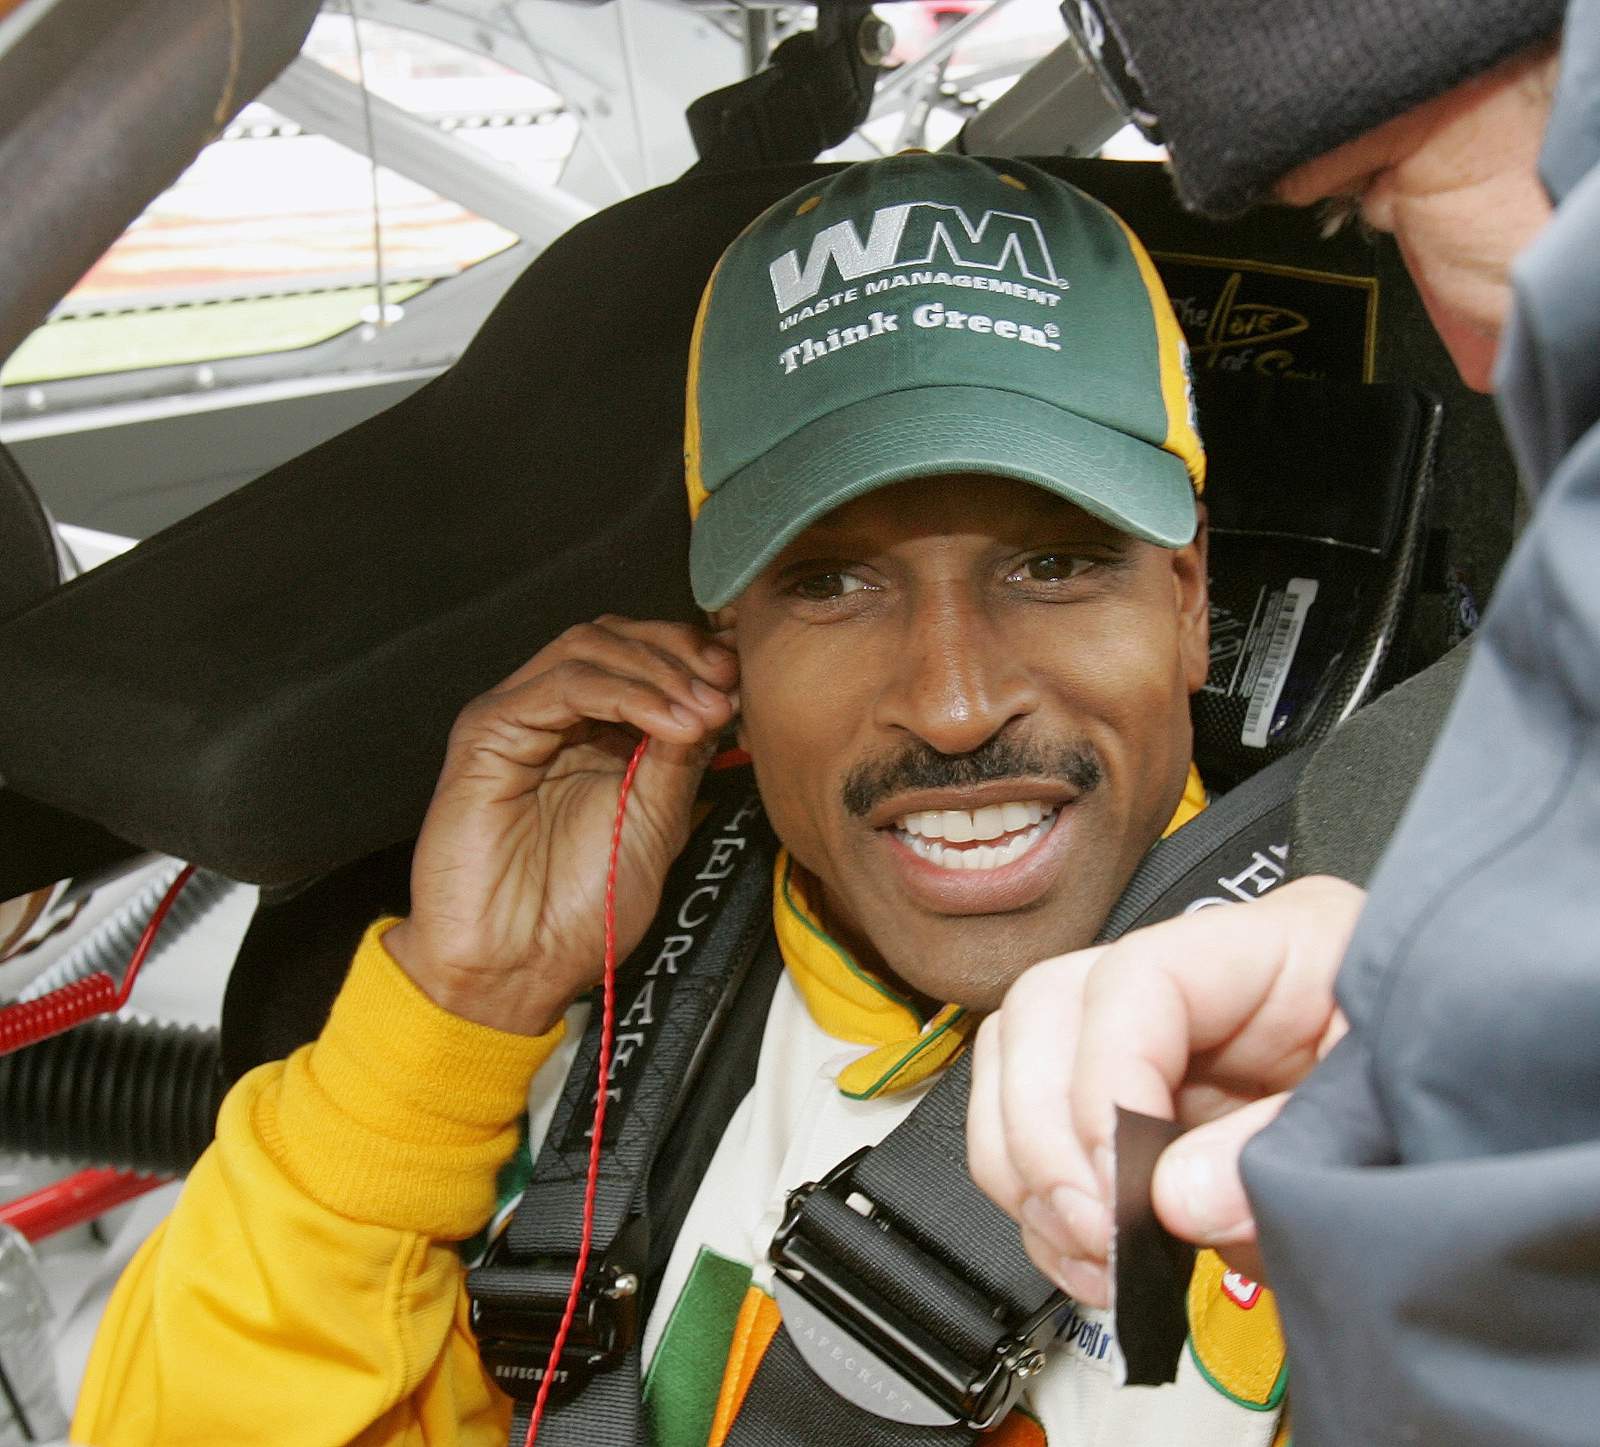 Bill Lester returning to a more welcoming, diverse NASCAR